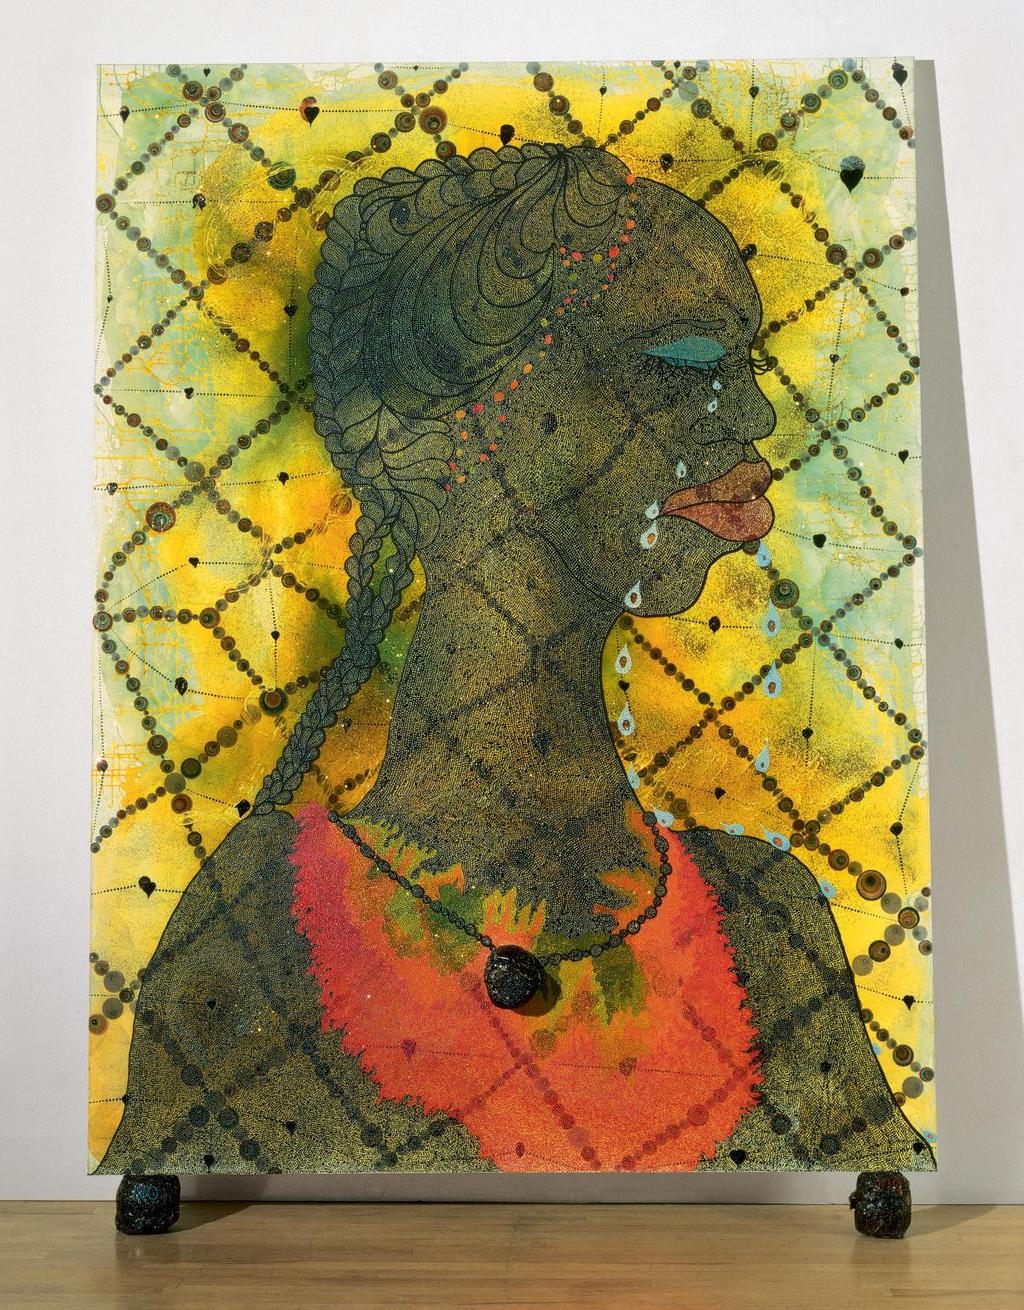 Collage and layering, Chris Ofili: hidden meaning between the layers Grades: 9th-12th 2-3 lesson Lesson Description : Research based learning from contemporary artist Chris Ofili No Woman, No Cry